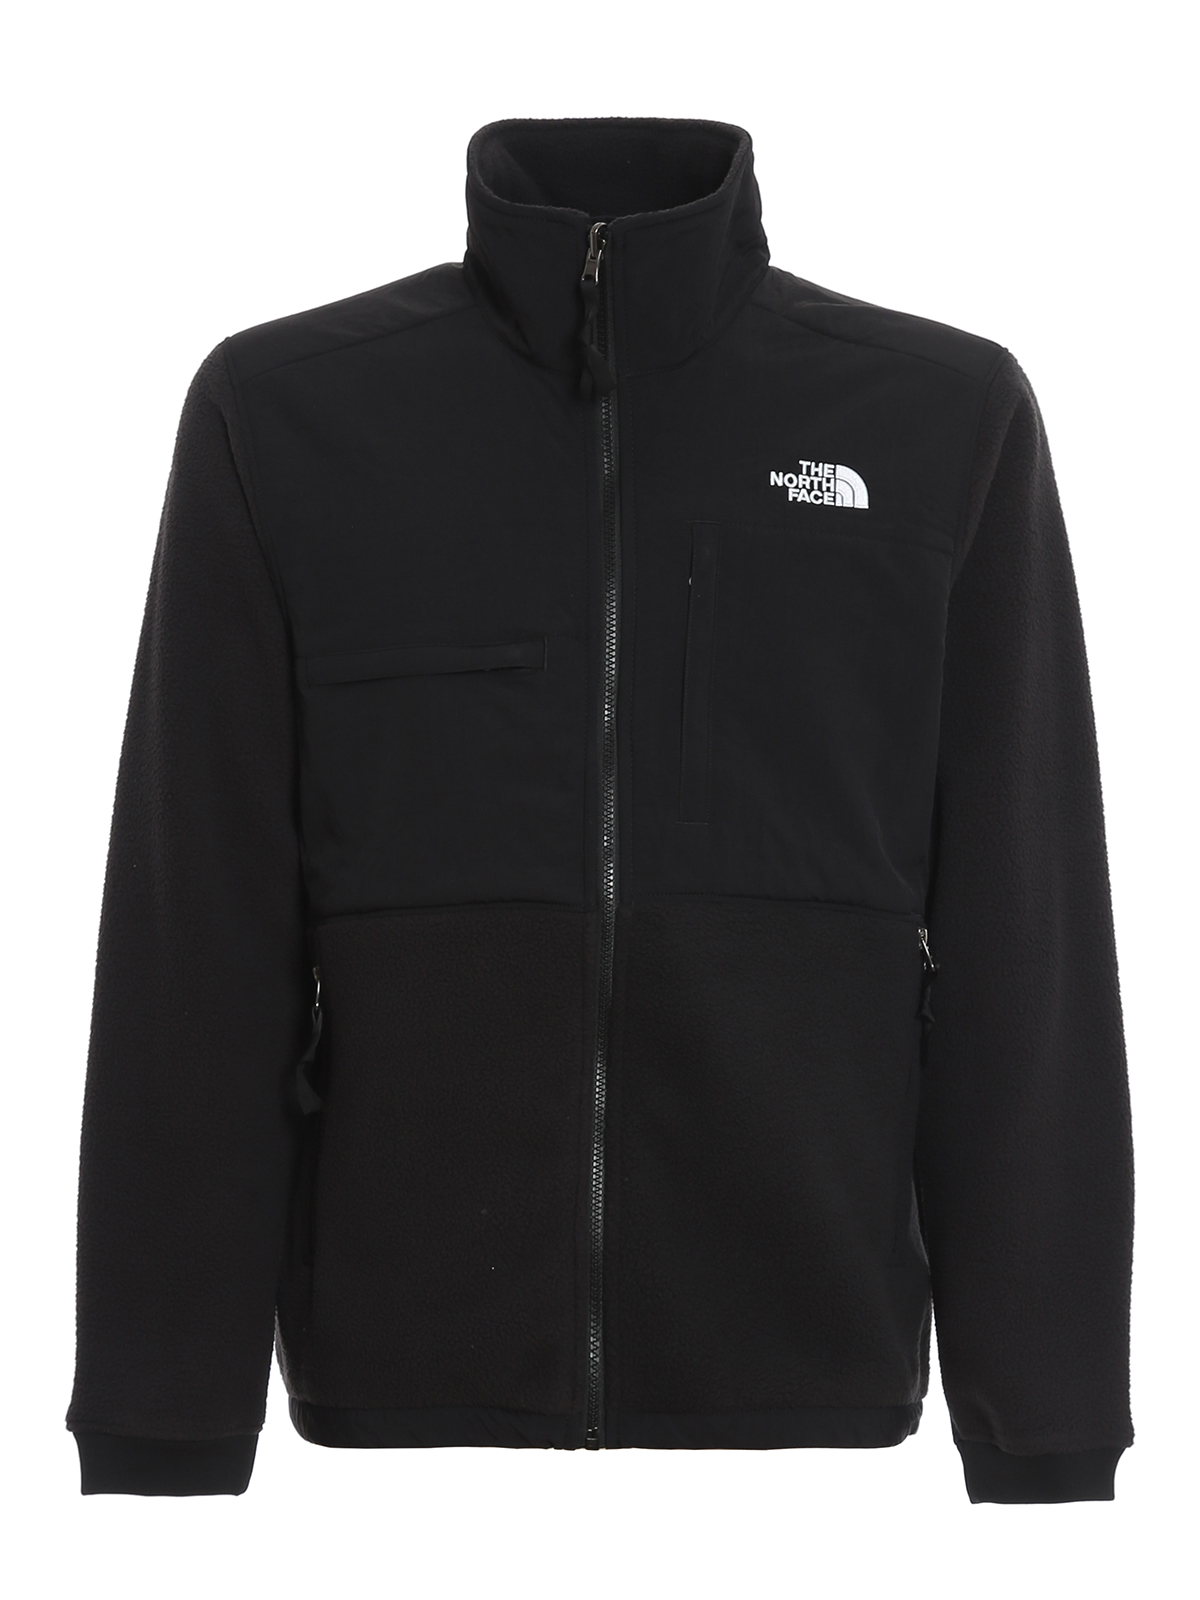 The North Face - Denali 2 pouch jacket - casual jackets - NF0A4QYJJK3